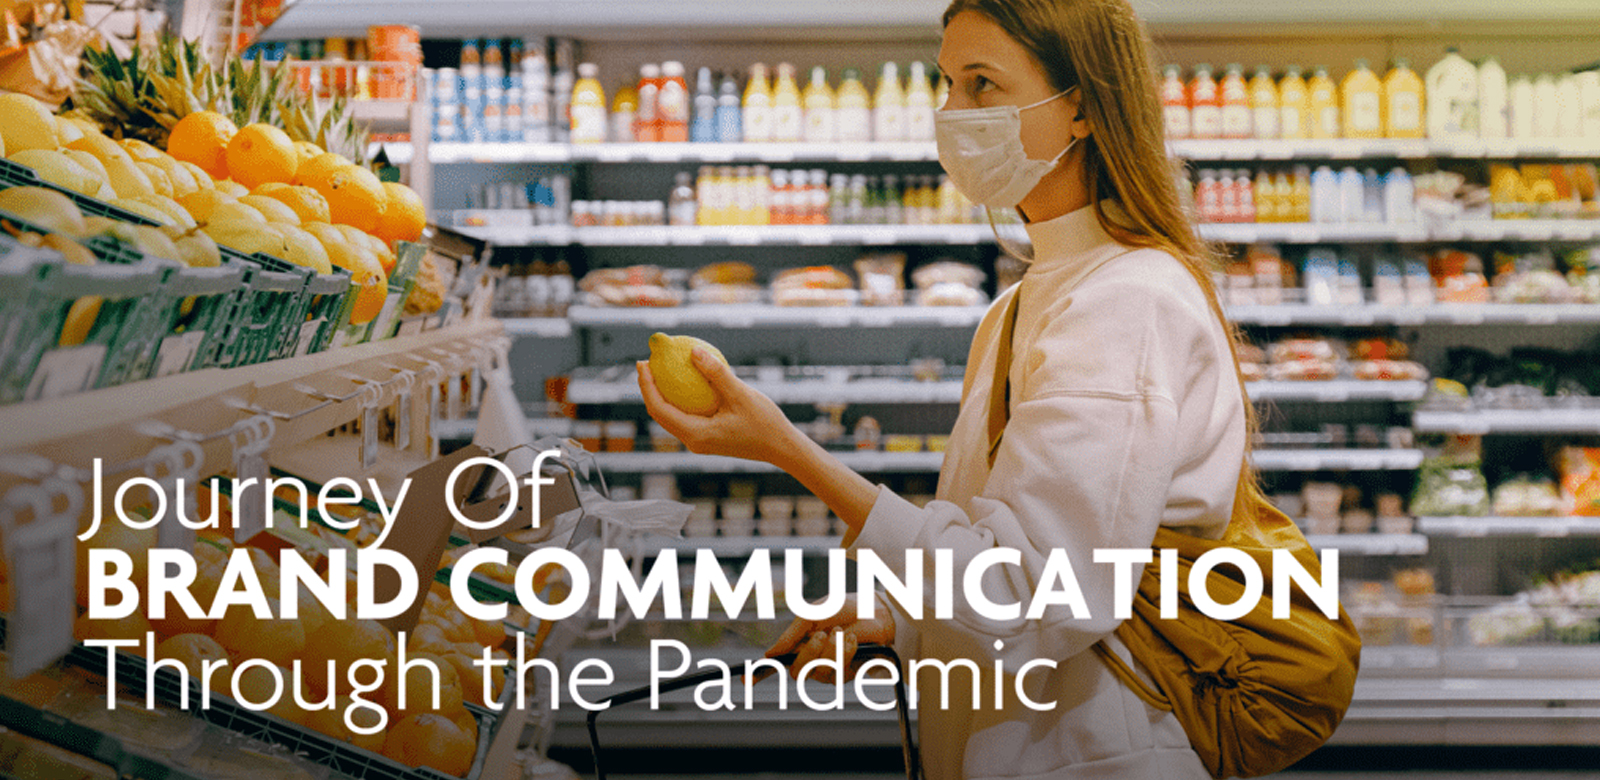 Journey of Brand Communication through the Pandemic